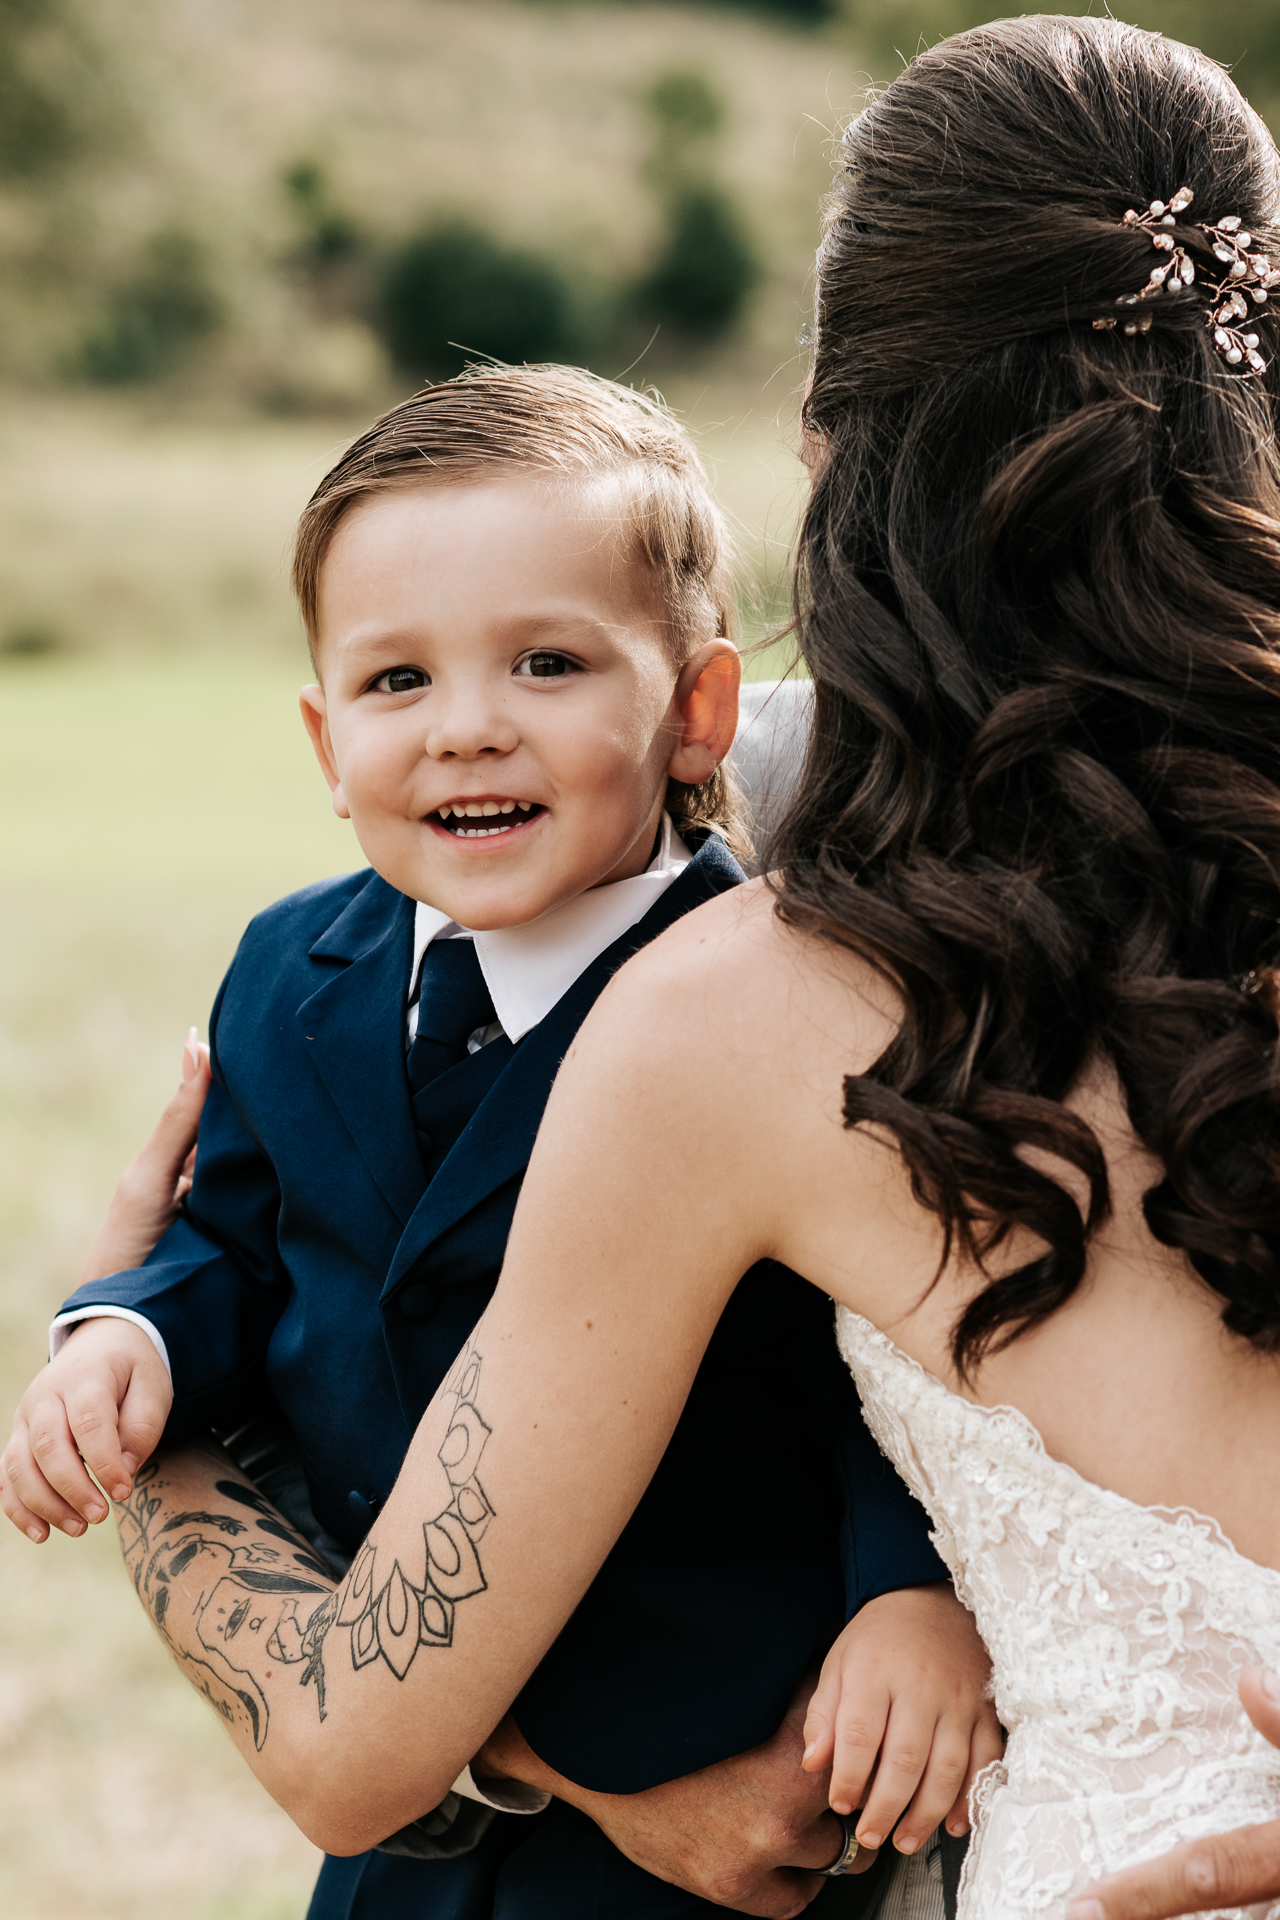 Son of the bride smiling after seeing his mom for the first time in her boho wedding dress